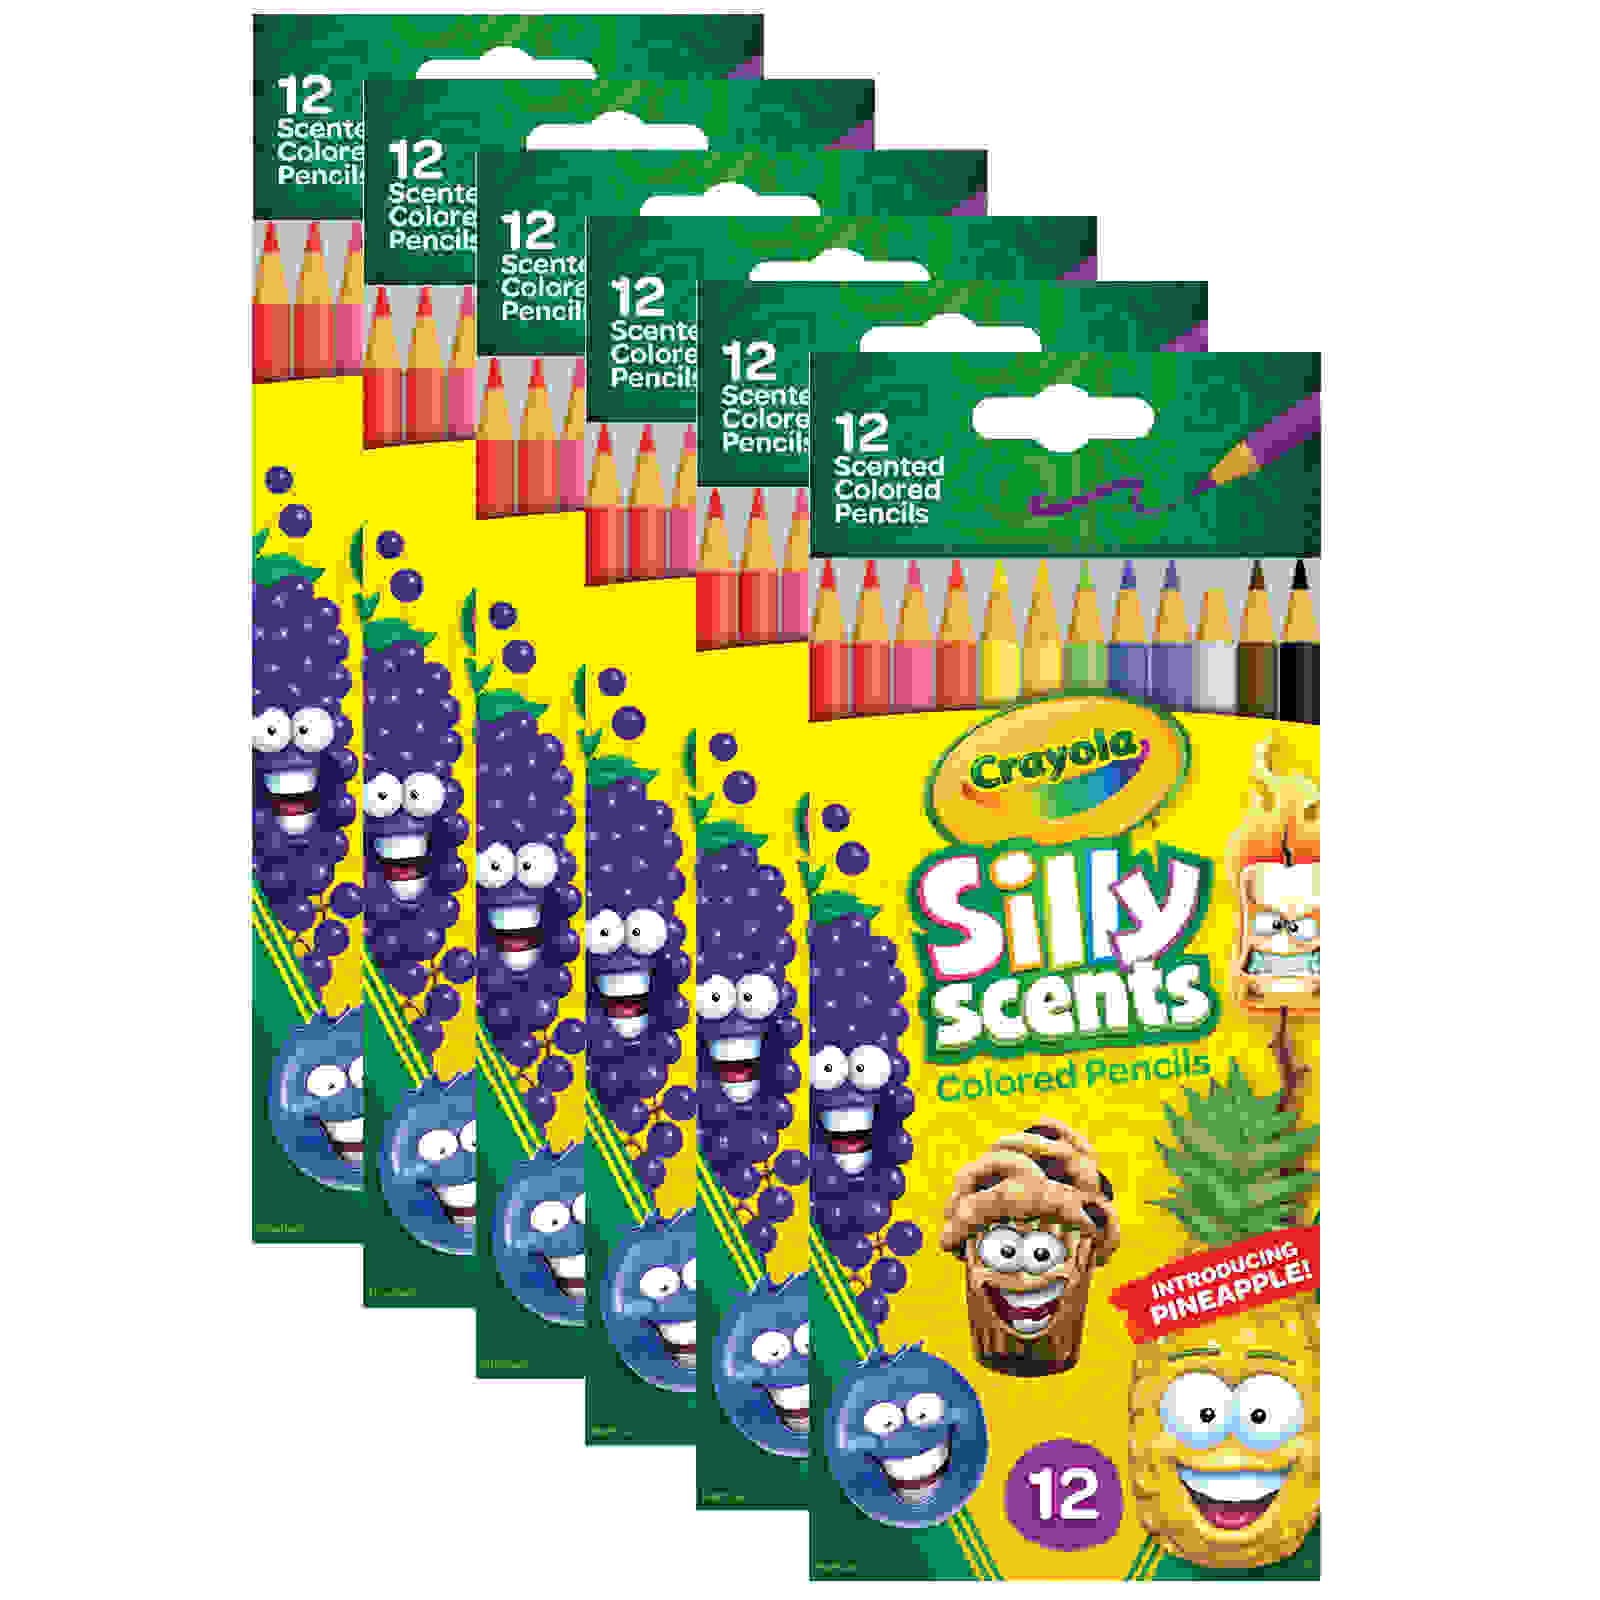 Silly Scents Colored Pencils, Sweet Scents, 12 Per Pack, 6 Packs